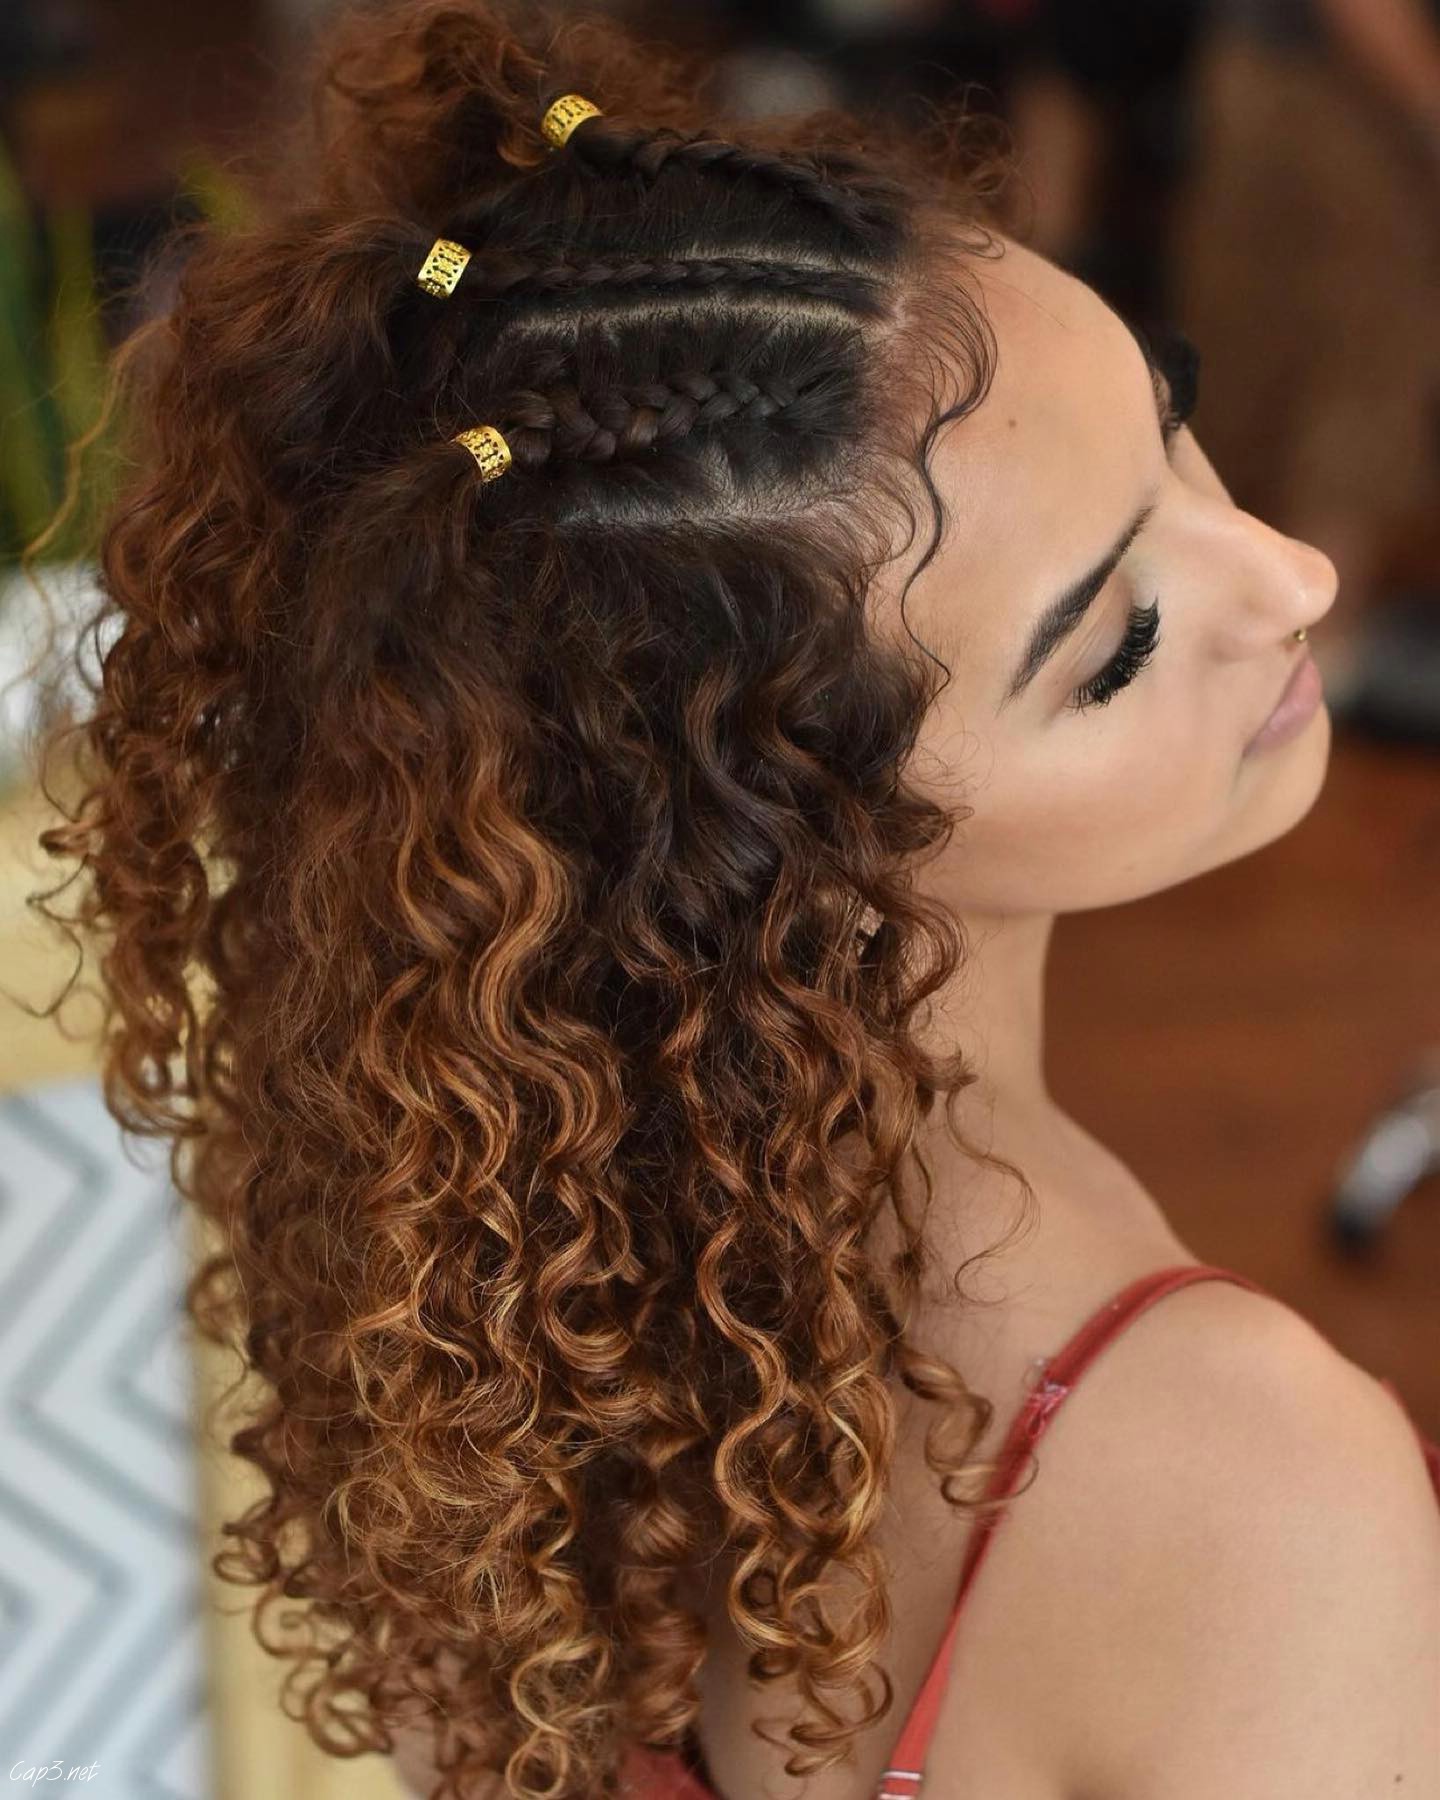 Cool Curls With Braids And Bright Ties